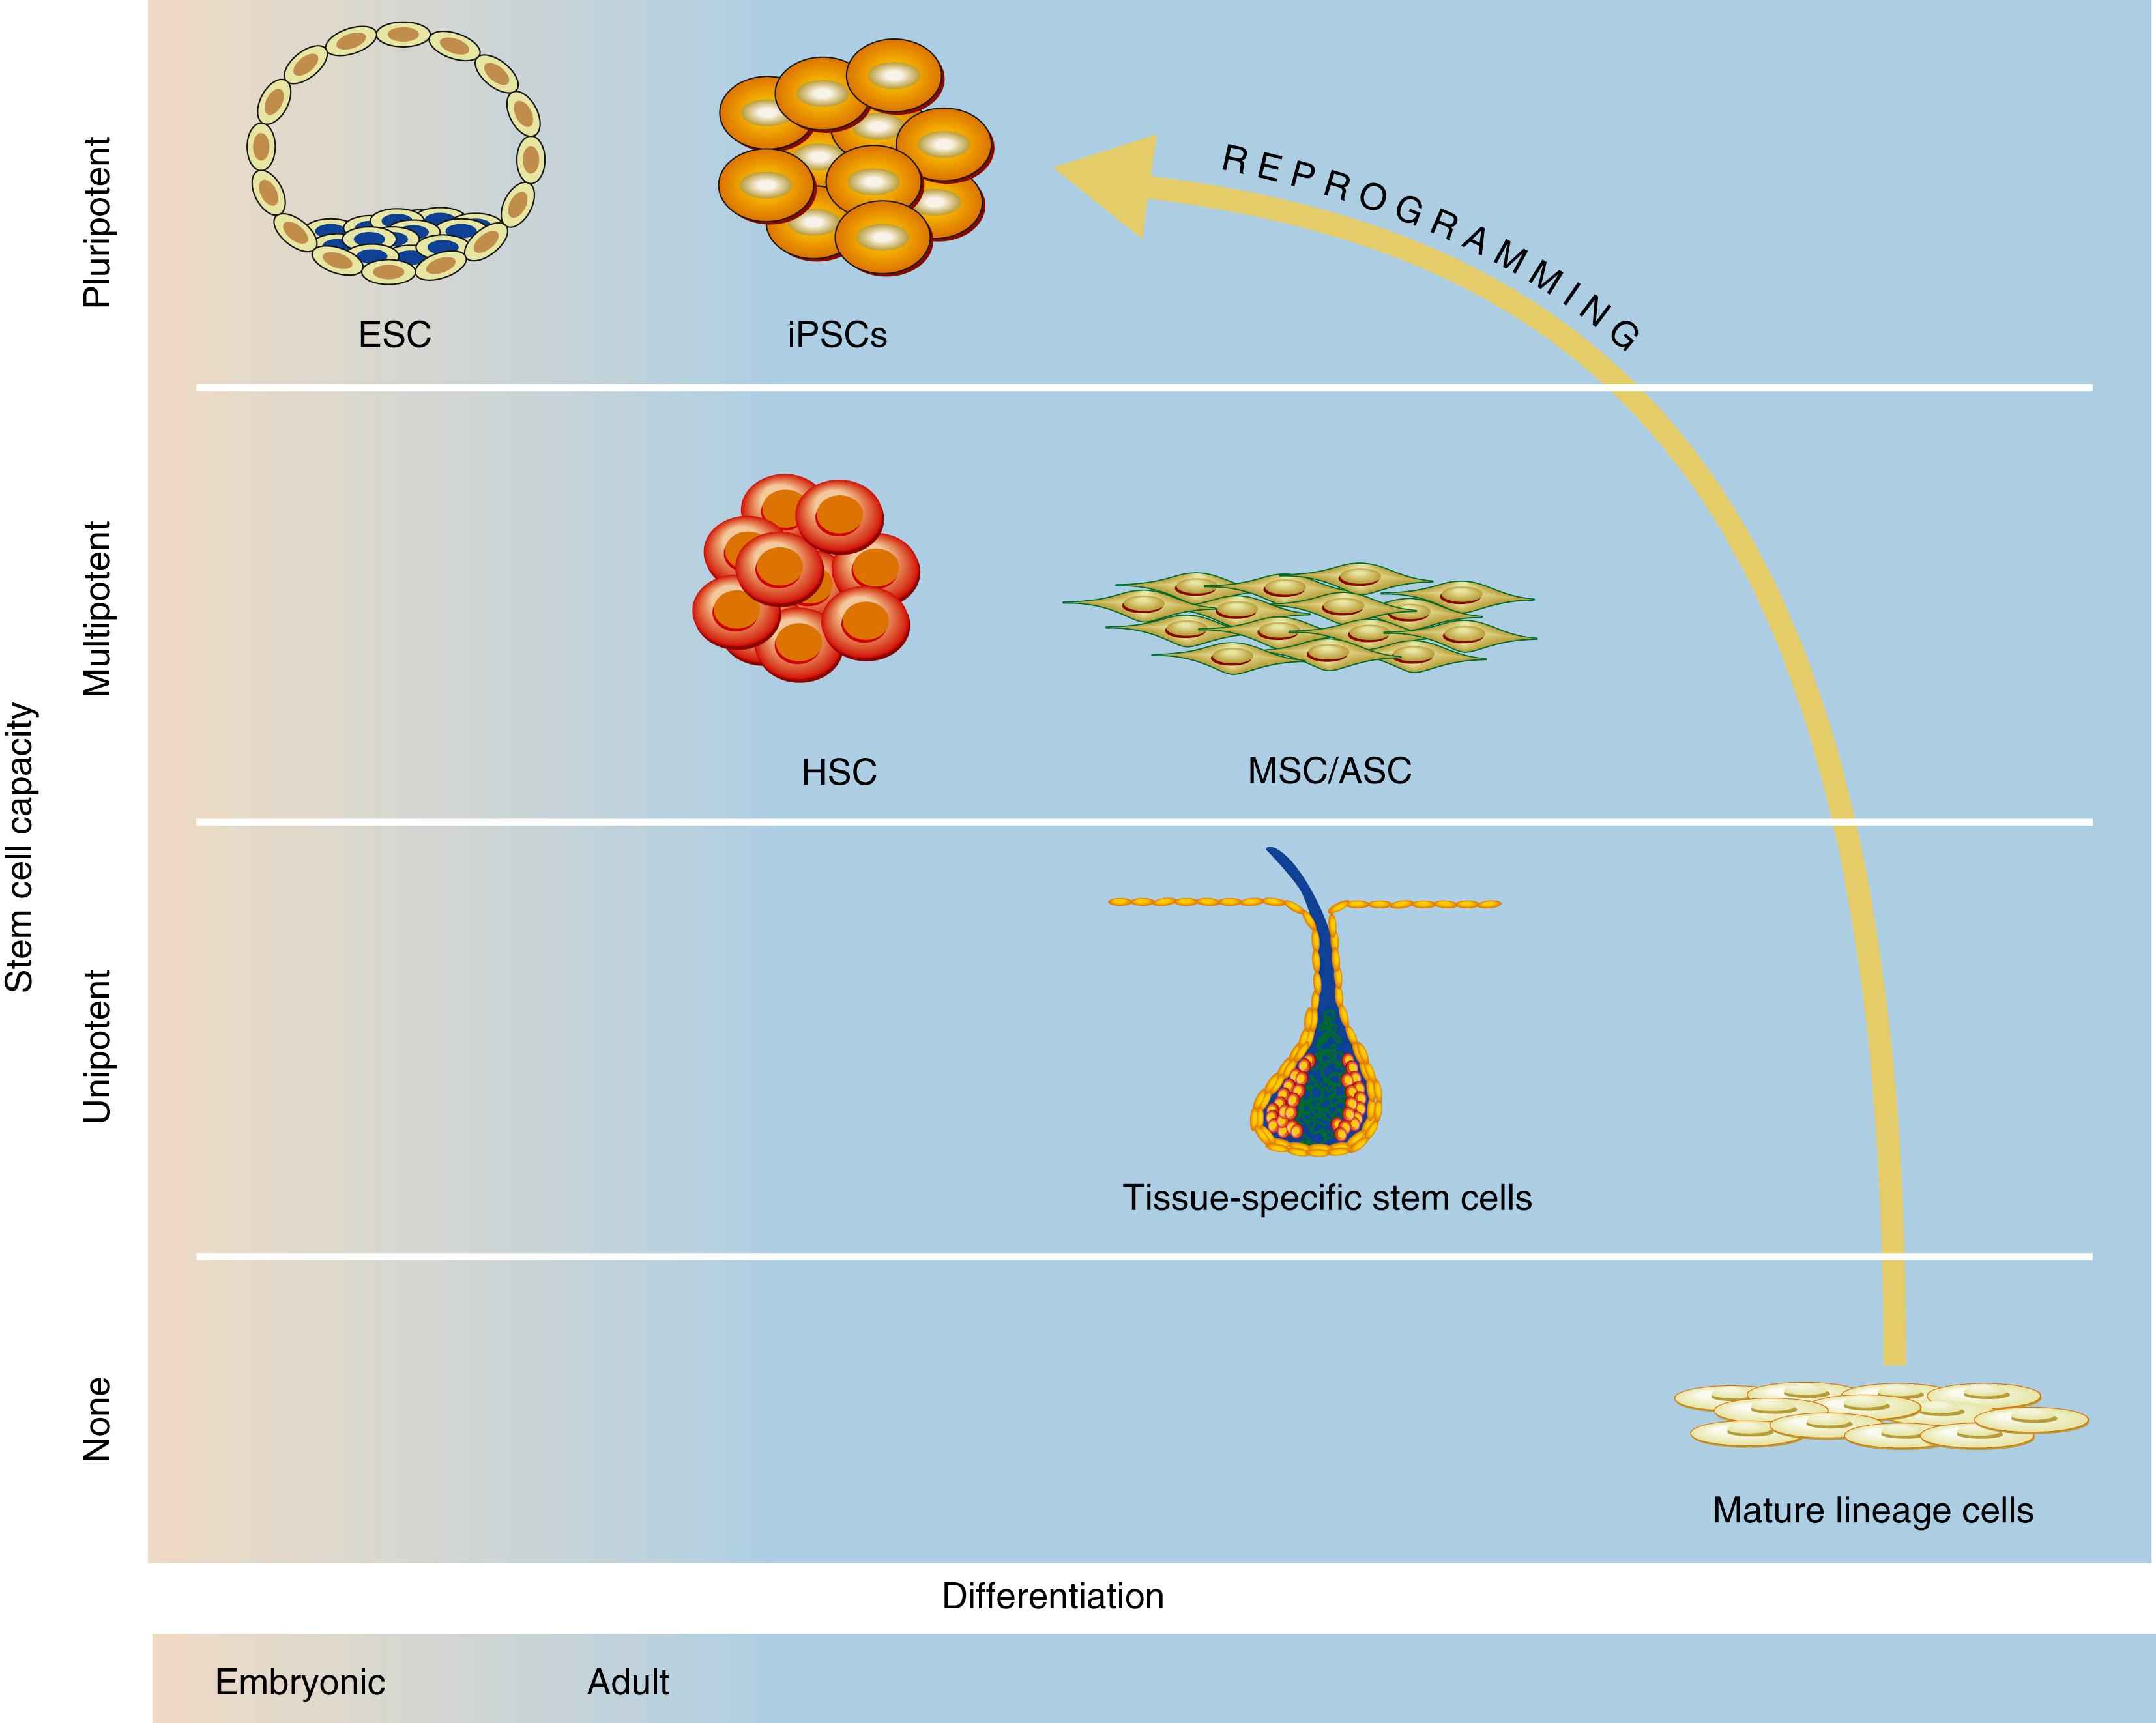 Fig. 7.1, Schematic of stem cell organization. Embryonic stem cells (ESCs), derived from the inner cell mass of the blastocyst, have the highest stem cell capacity (pluripotent) and are the least committed to any tissue lineage. Adult stem cells, such as hematopoietic stem cells (HSCs) and mesenchymal stem cells (MSCs) , have differentiation fates limited to certain tissue lineages (multipotent) and remain in a relatively undifferentiated state at rest but become activated upon injury. Tissue-specific stem cells, such as skin follicular bulge cells, are limited to producing a single cell and tissue type (unipotent) and retain considerable proliferative capacity to regenerate their specific tissue. Mature lineage cells, such as epithelial cells, do not have regenerative potential. Induced pluripotent stem cells (iPSCs) are mature lineage cells or adult stem cells that have been reprogrammed to a state of relative pluripotency and have much of the same regenerative potential as ESCs. ASC , Adipose stem cell.